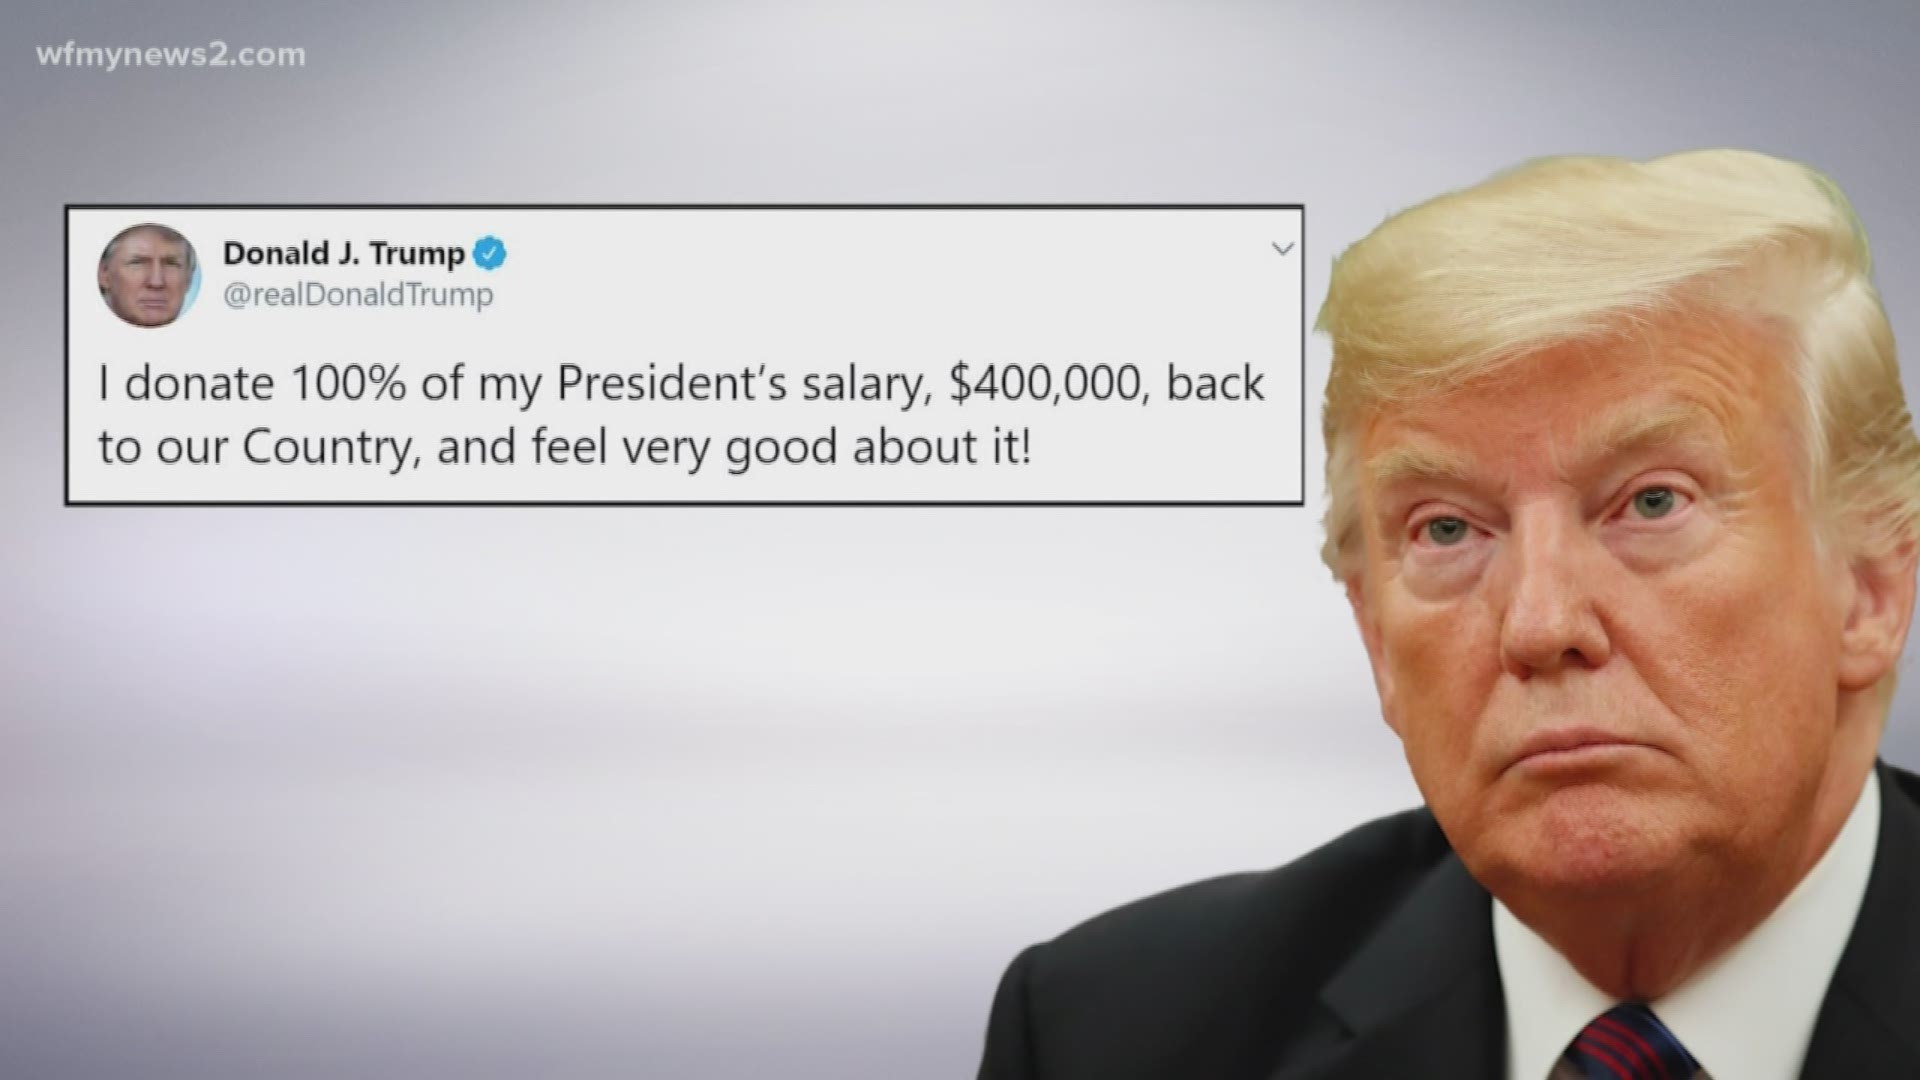 For his first three years in office, President Trump donated his $400,000 salary each quarter to different agencies. Each has received $100,000.